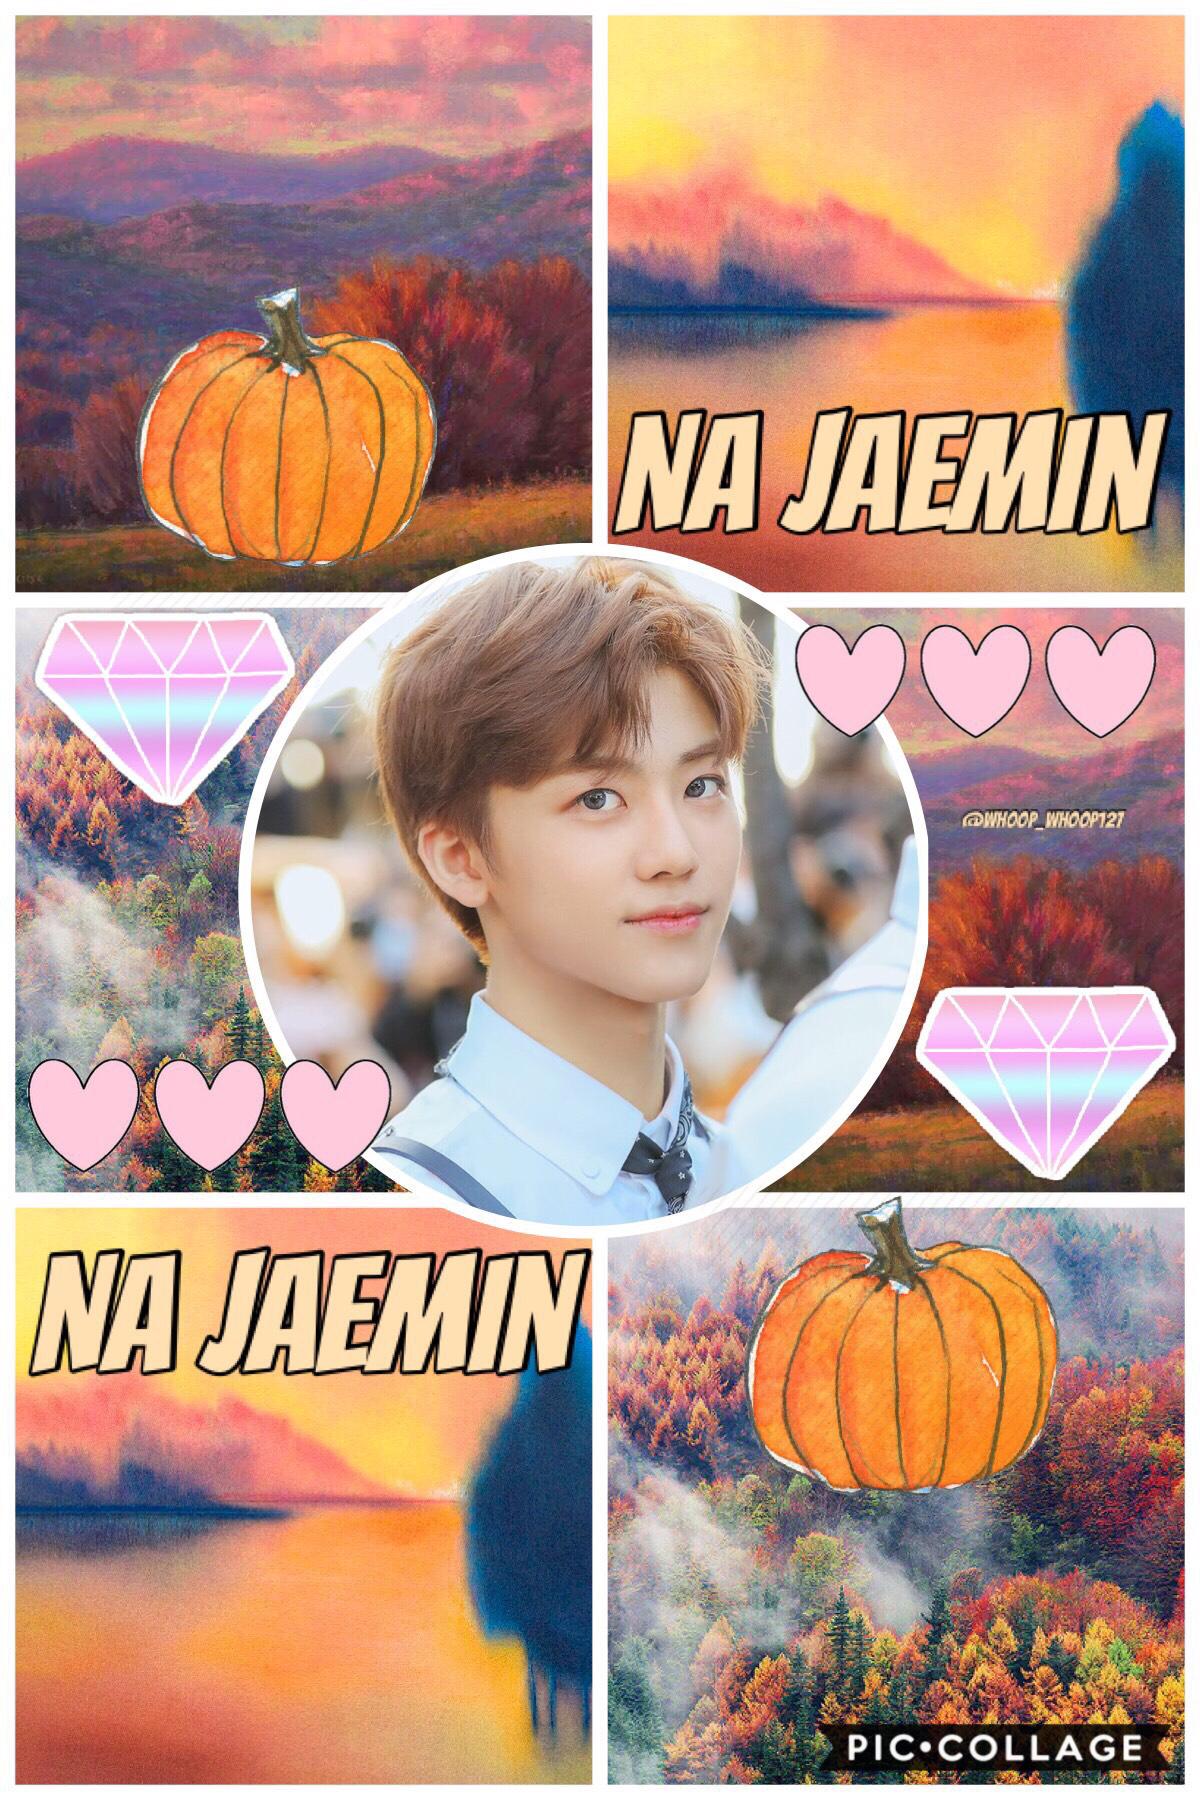 •🚒•
🍁Jaemin~NCT🍁
Edit for @jizzle_pWARK❤️
Omggg guys it’s WinWin’s bDaY today and he’s the one who says WHOOP WHOOP WHOOP WHOOP omgggg yaaaaassssssss 
But he deserves more lines cause he has a beautiful voice, you can hear it in CHAIN by NCT127 wowowo